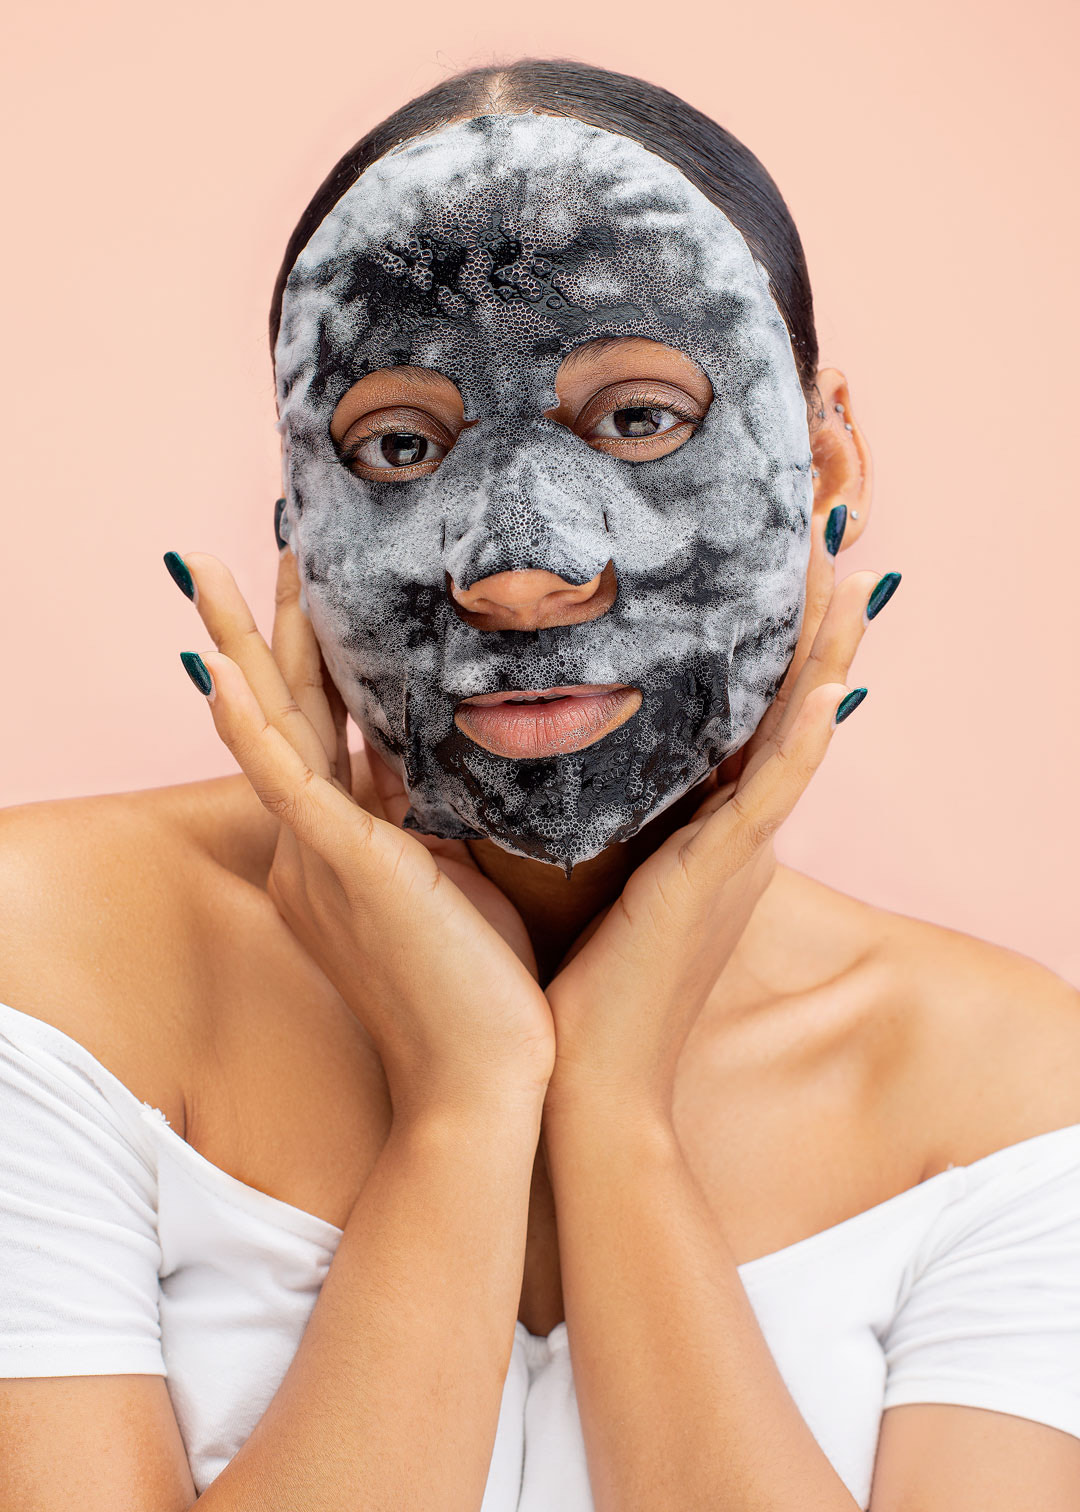 Benefits of Incorporating Facial Masks into Your Skincare Routine